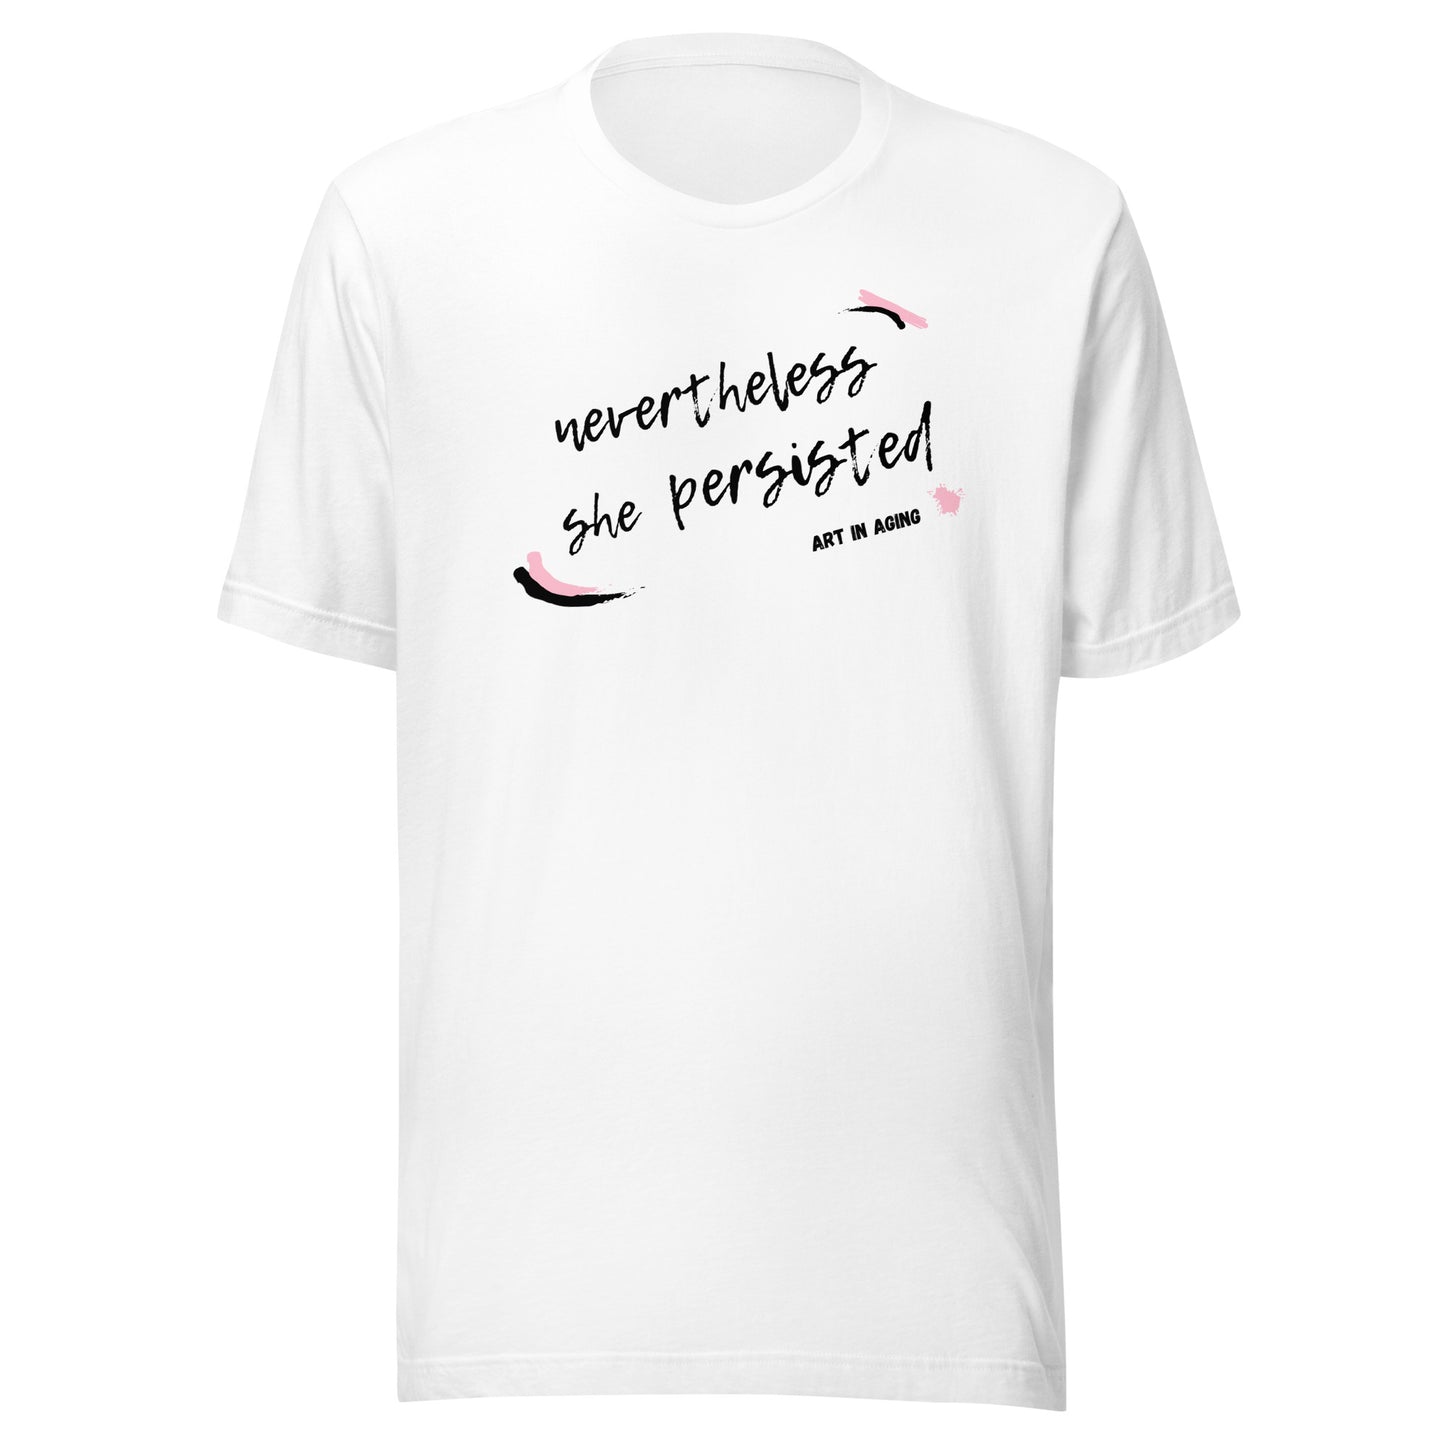 Nevertheless She Persisted T-Shirt | Art in Aging